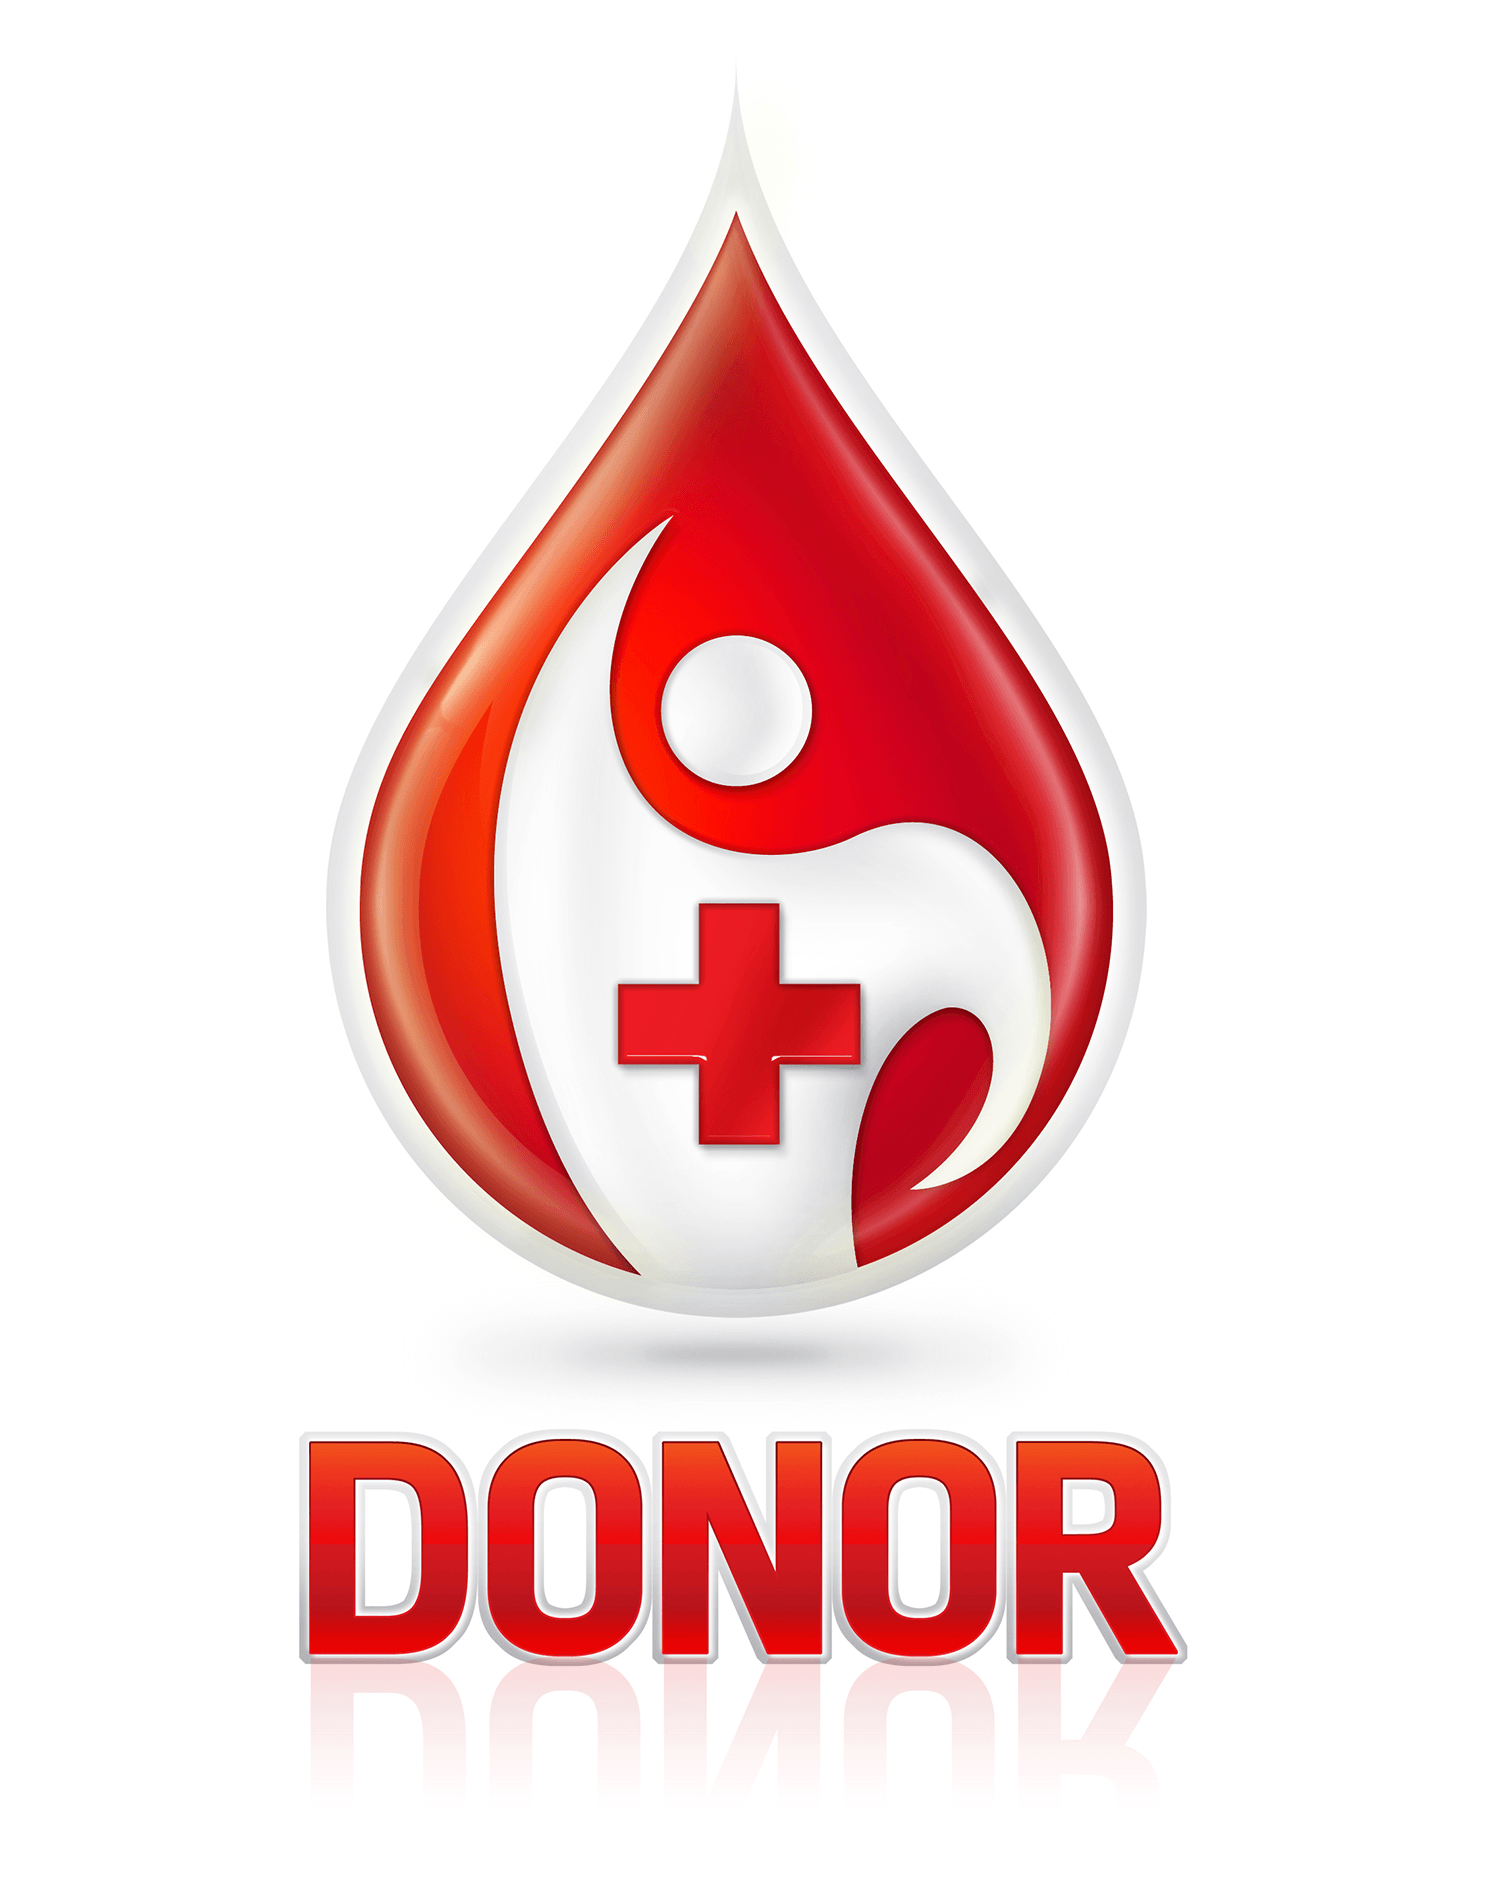 Free Blood Donation, Download Free Clip Art, Free Clip Art on